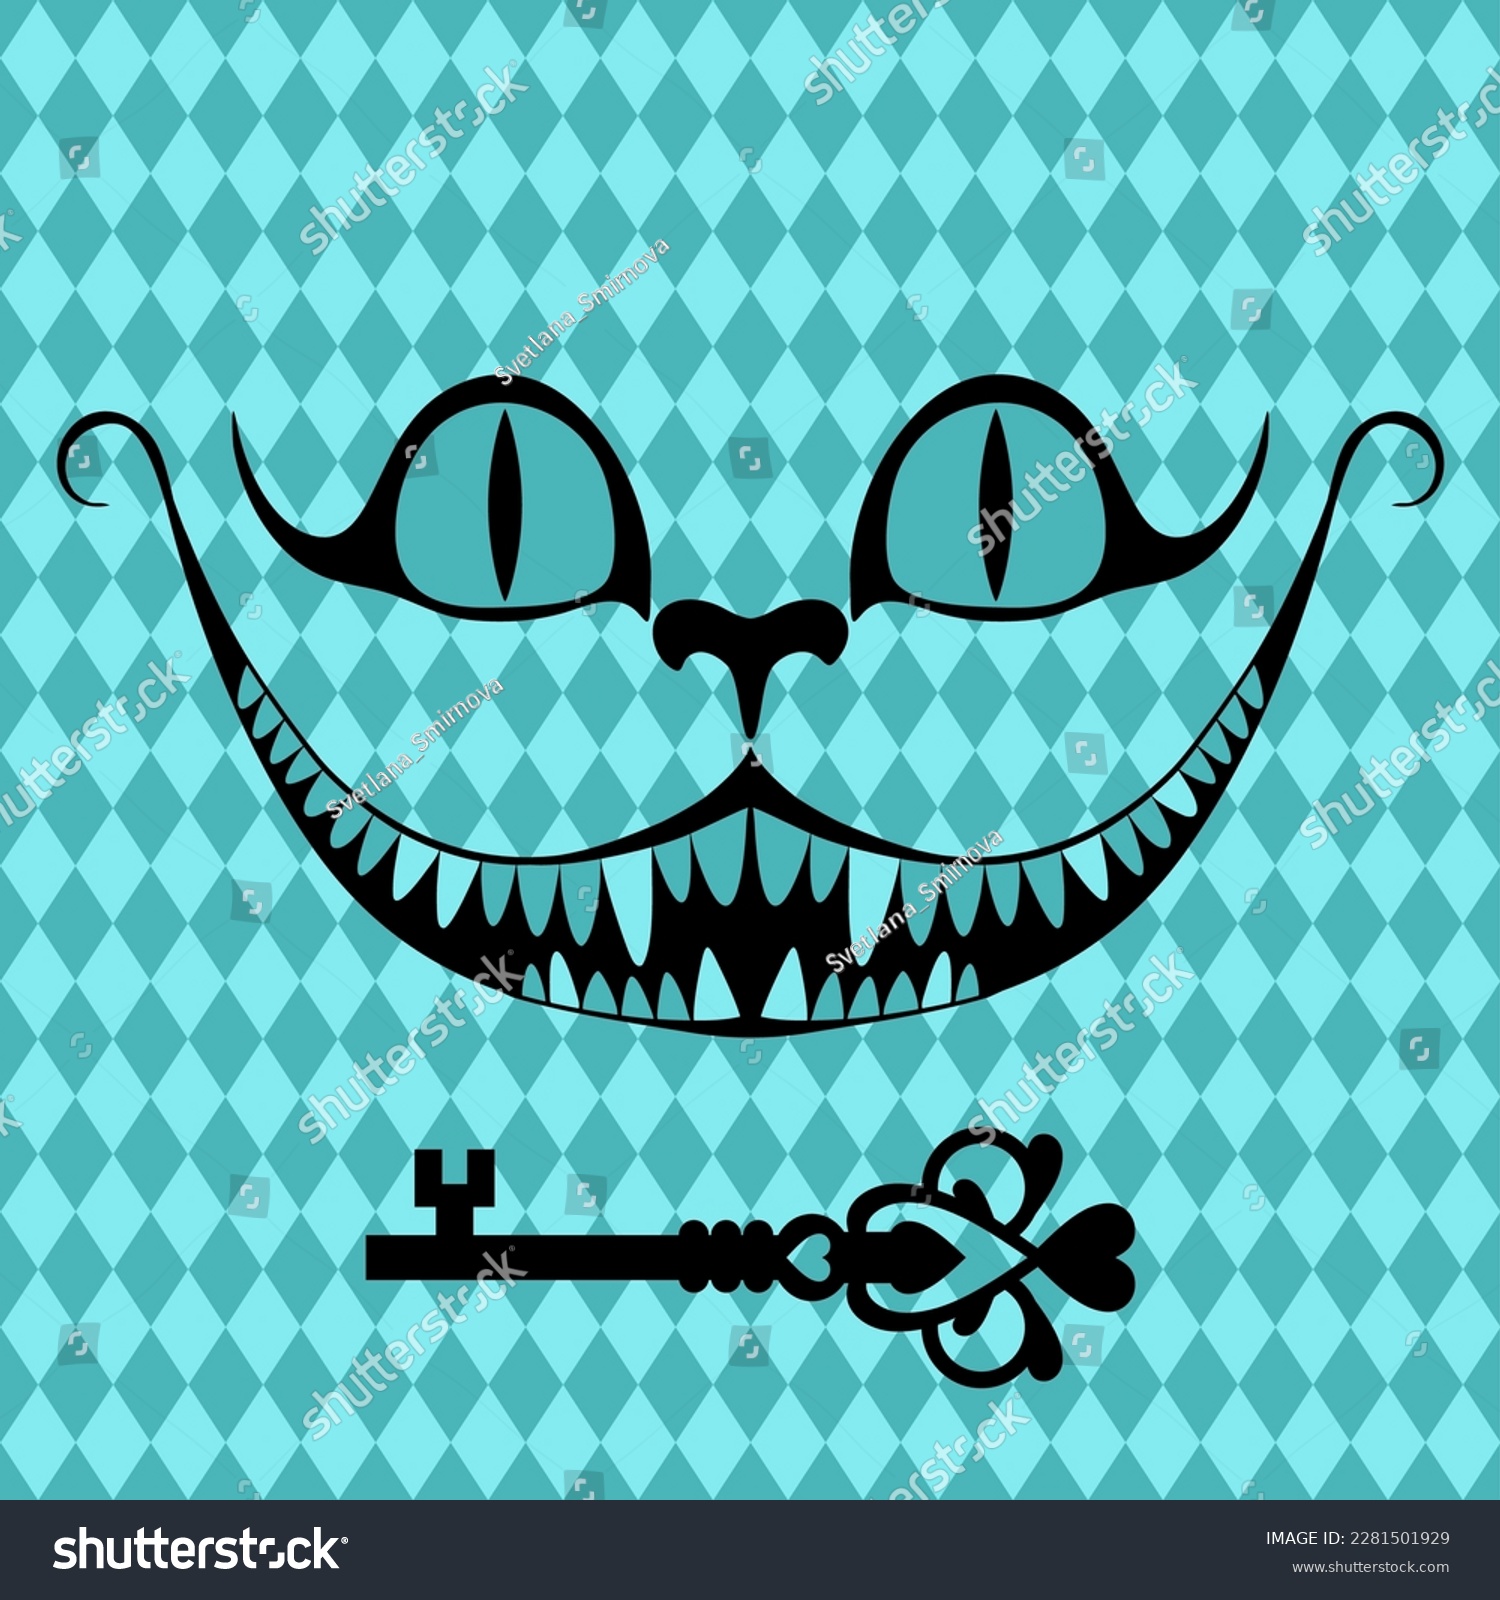 SVG of Wonderland vector card. Mad tea party. Black silhouettes  the smile of the Cheshire cat and the key to wonderland on blue checkered background svg